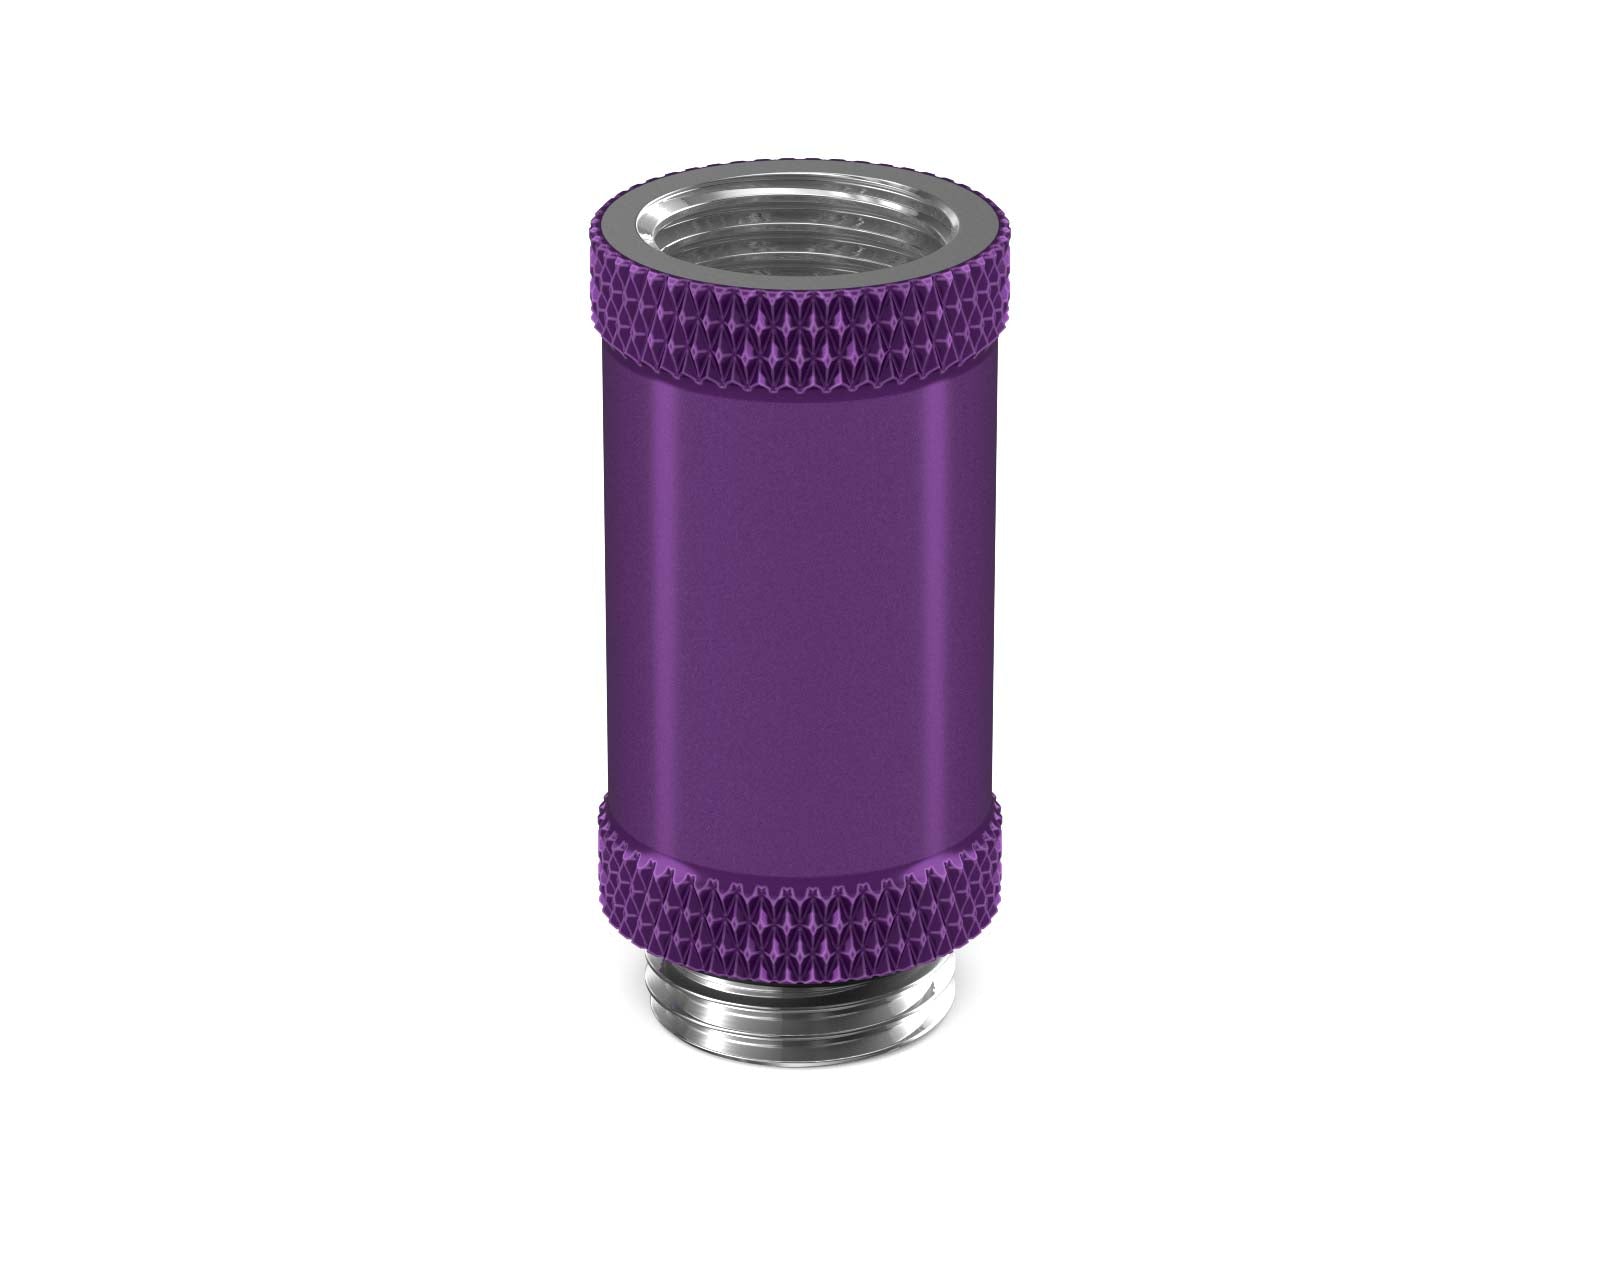 PrimoChill Male to Female G 1/4in. 30mm SX Extension Coupler - PrimoChill - KEEPING IT COOL Candy Purple